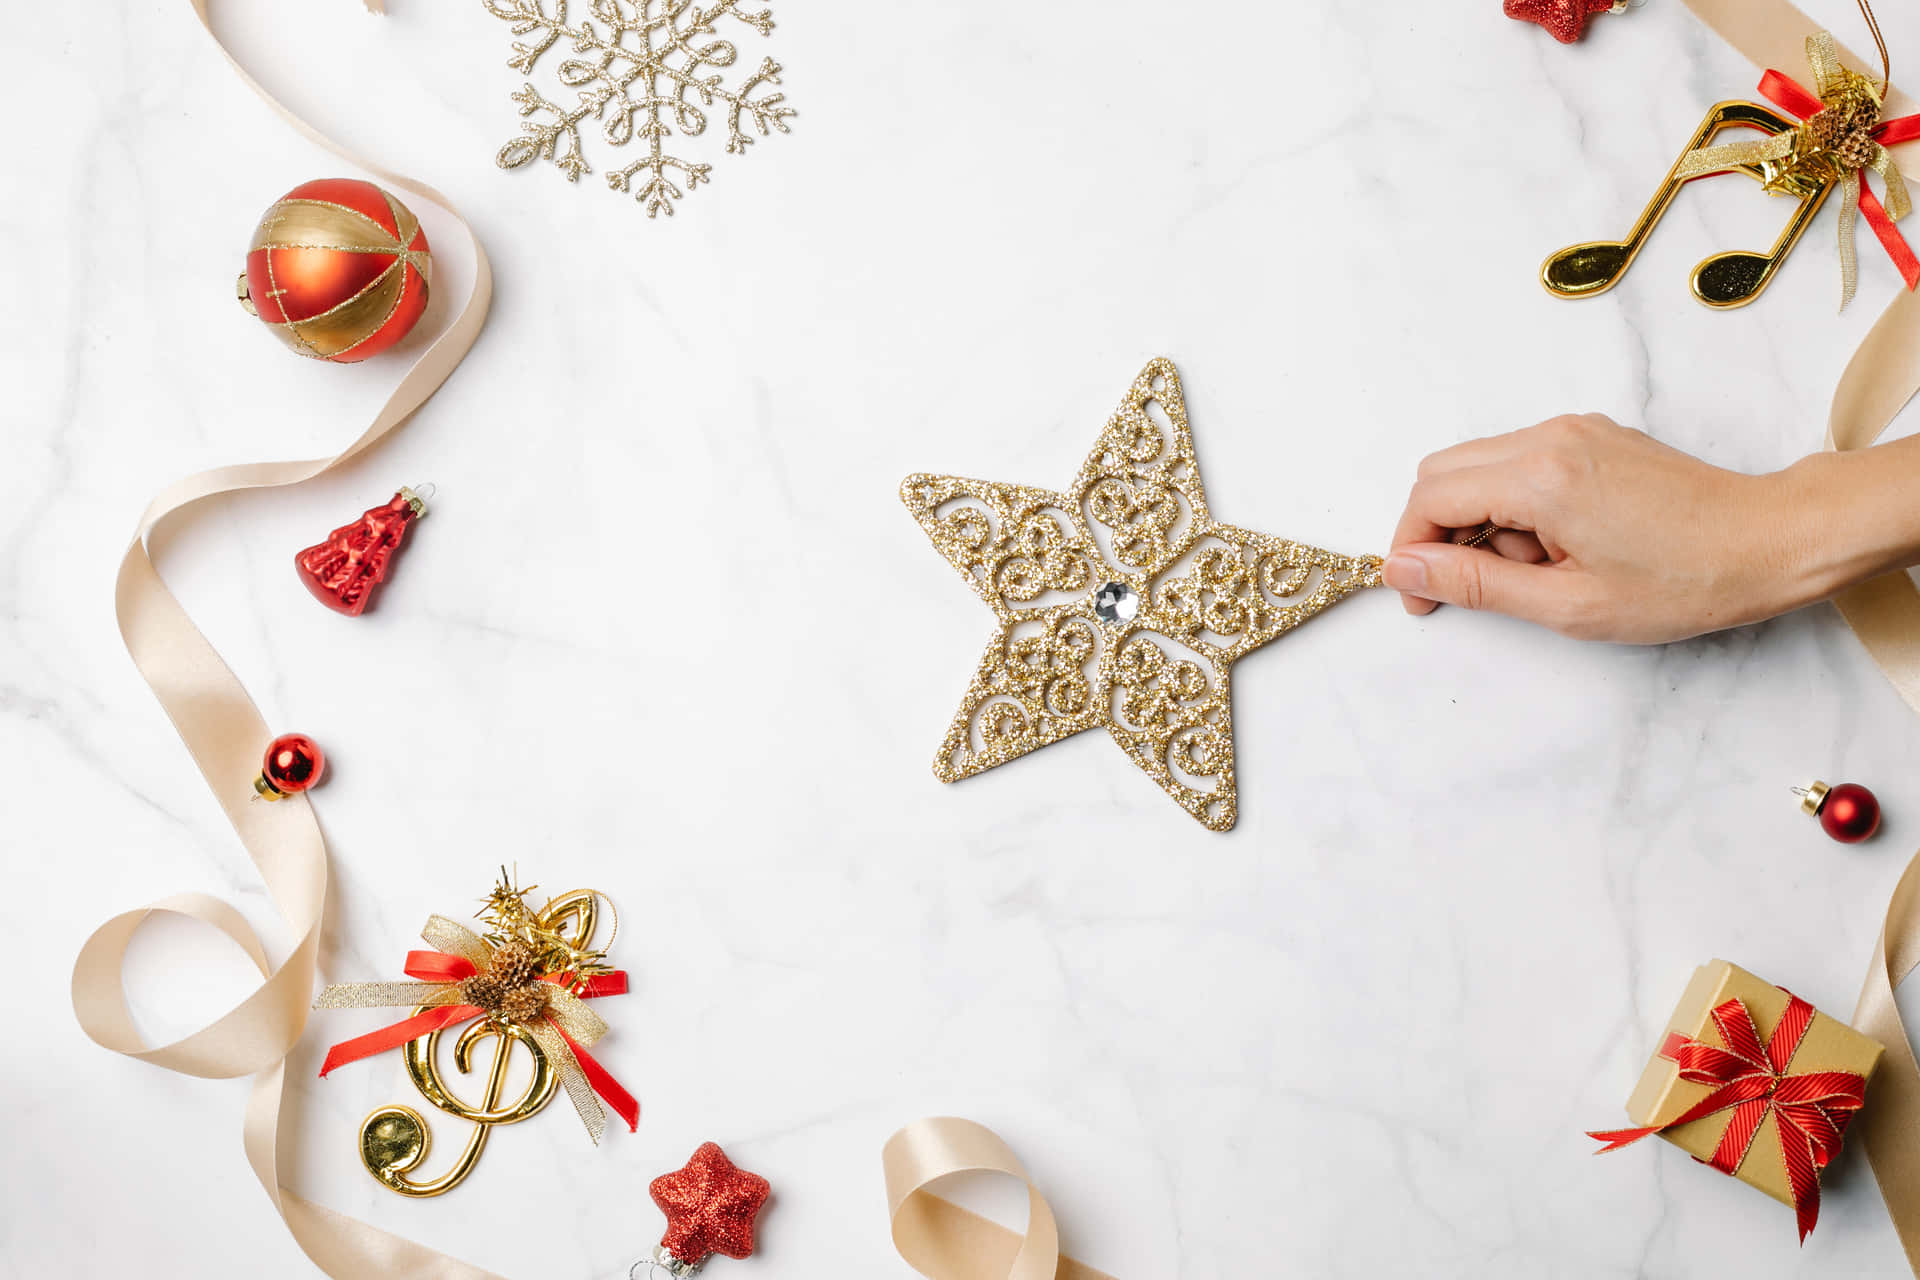 Spread the Christmas cheer with this cute, simple holiday design. Wallpaper